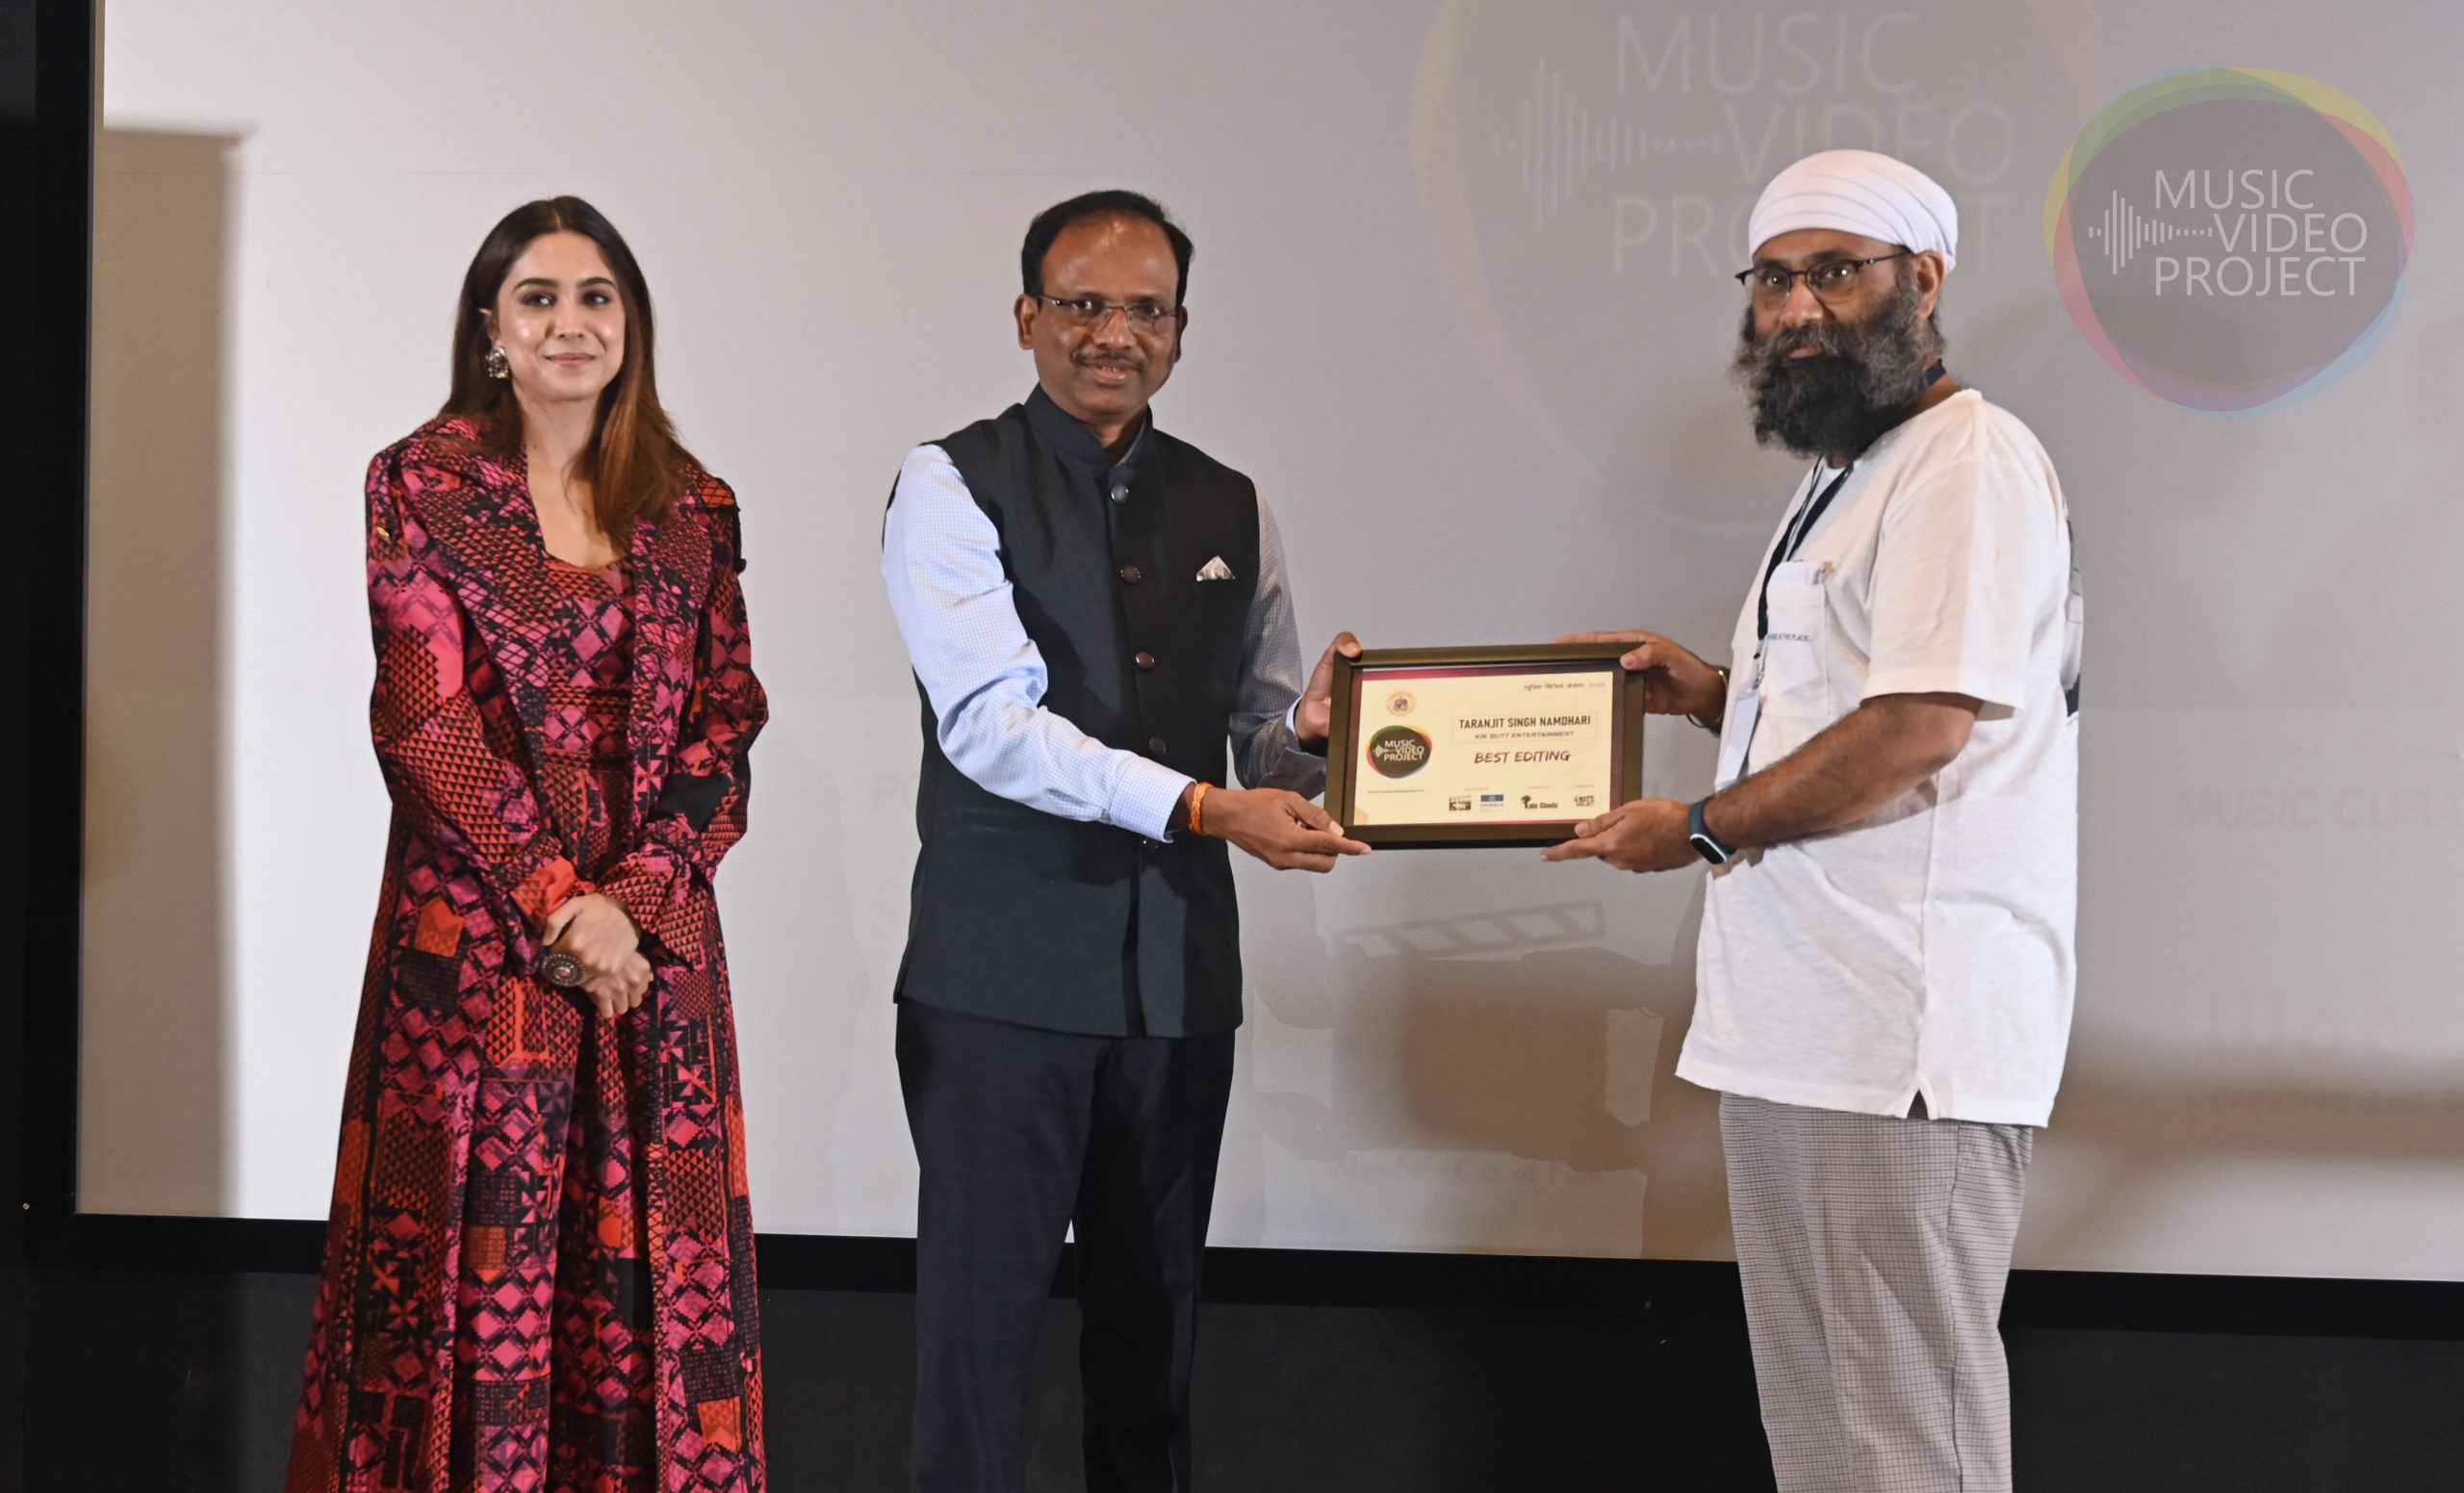 The Special Guest of the Music Video Project 2022 awards ceremony, actor Sharvari Wagh presents the Audience Choice winner certificate to Team Kik Butt Entertainment for their music video on the original track 'The Mumbai Dhanak' by Saisamarth Mulay.